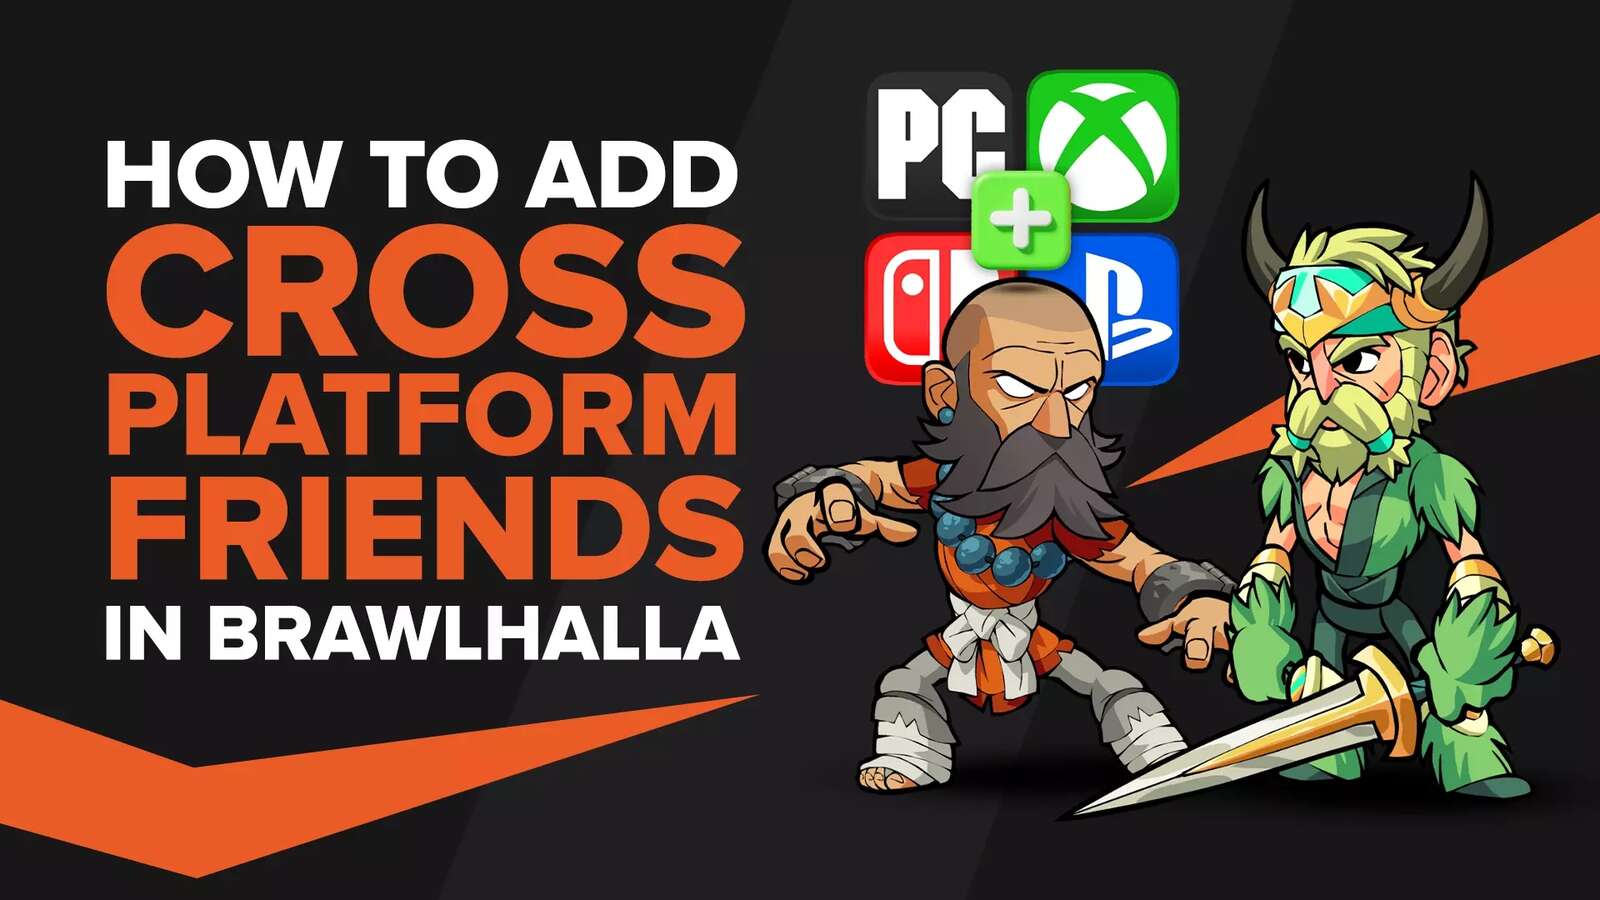 Can you add friends in Brawlhalla Cross Platform? [Answered]